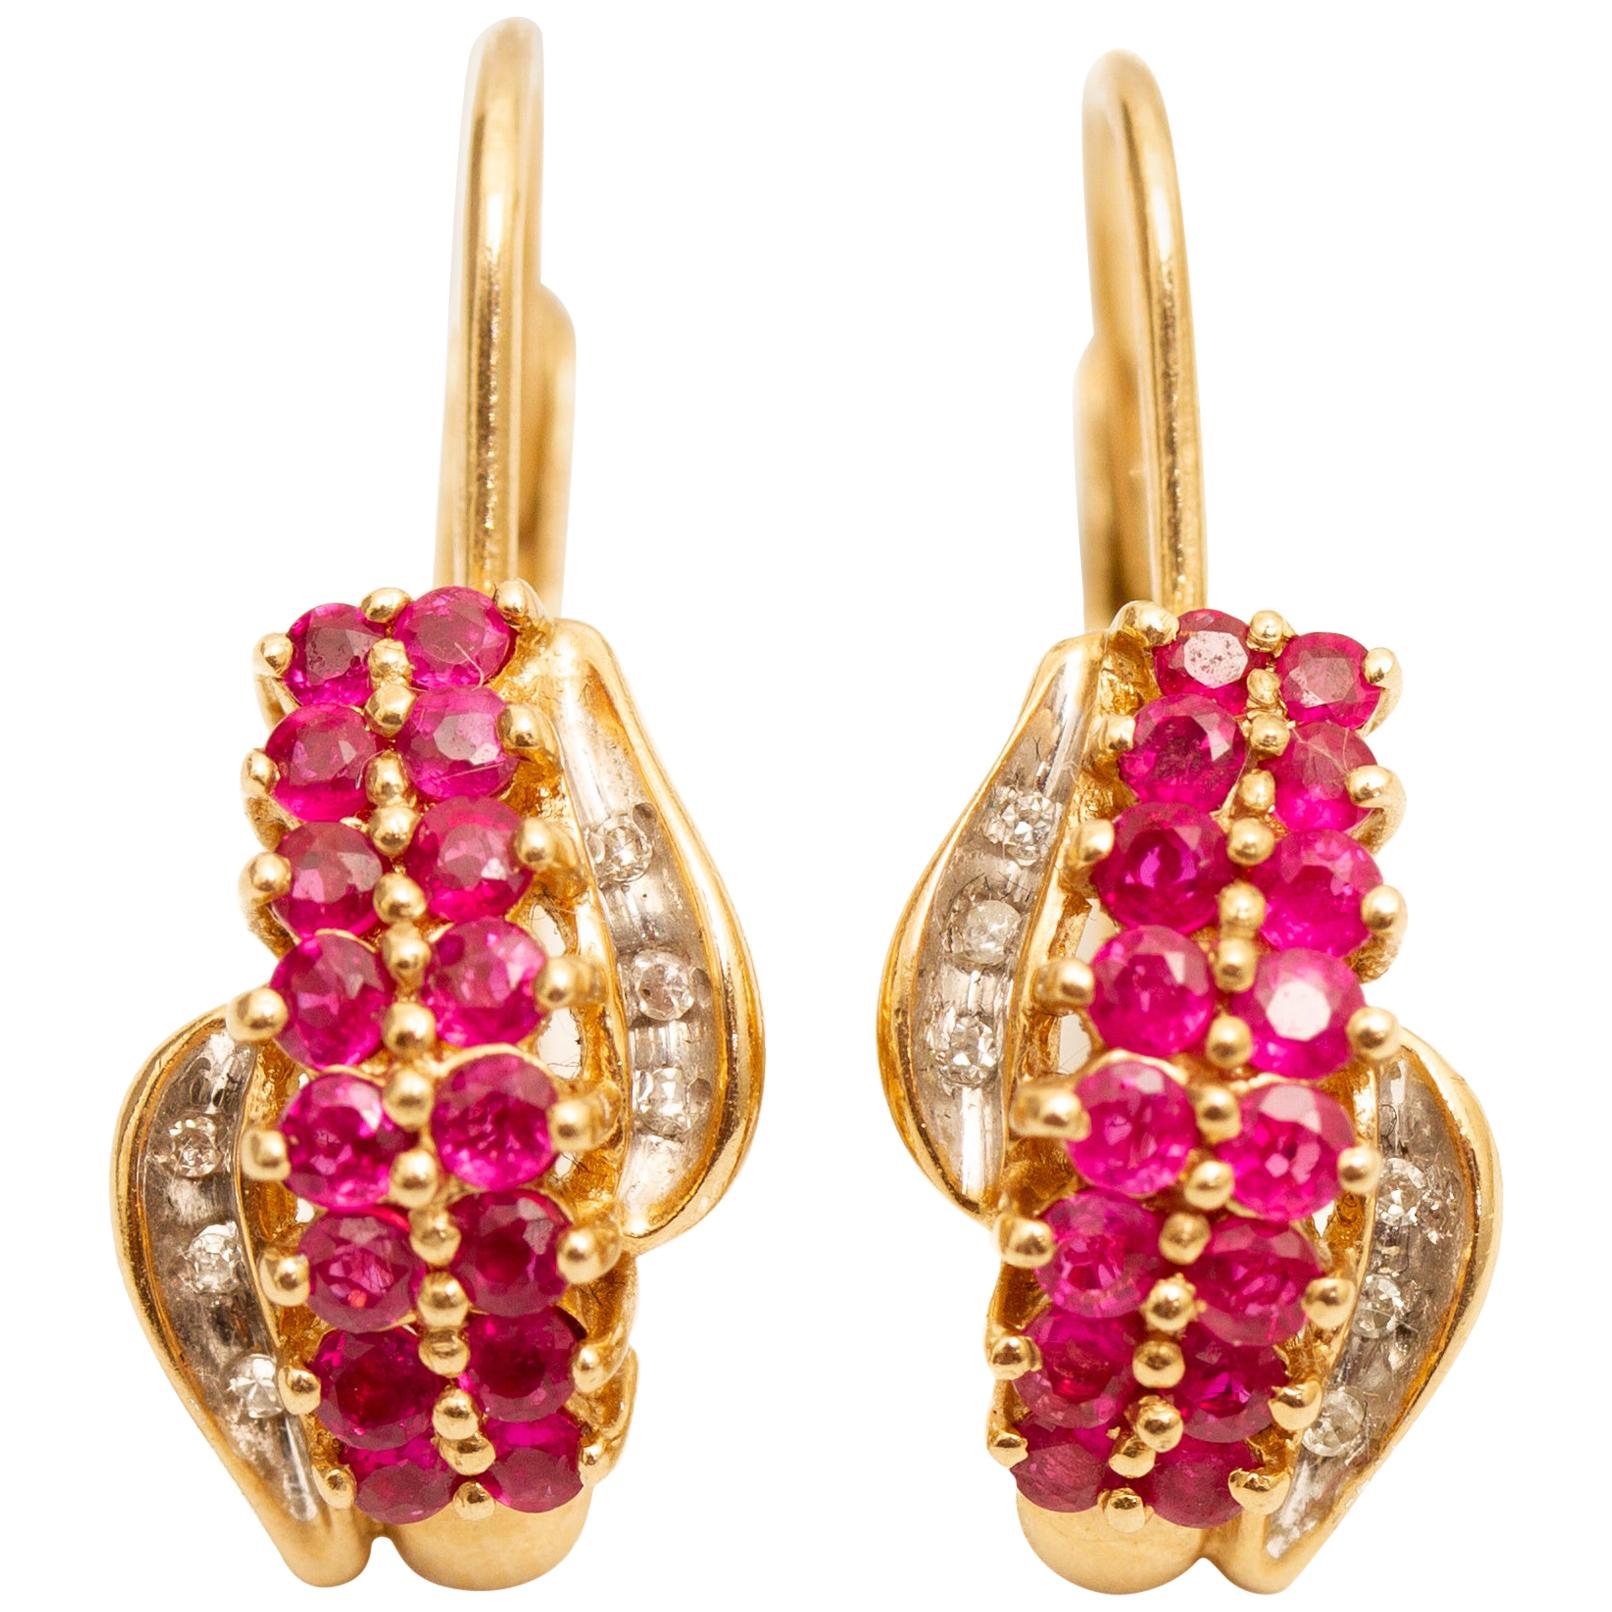 Contemporary 14 Karat Gold Diamond and Ruby Earrings